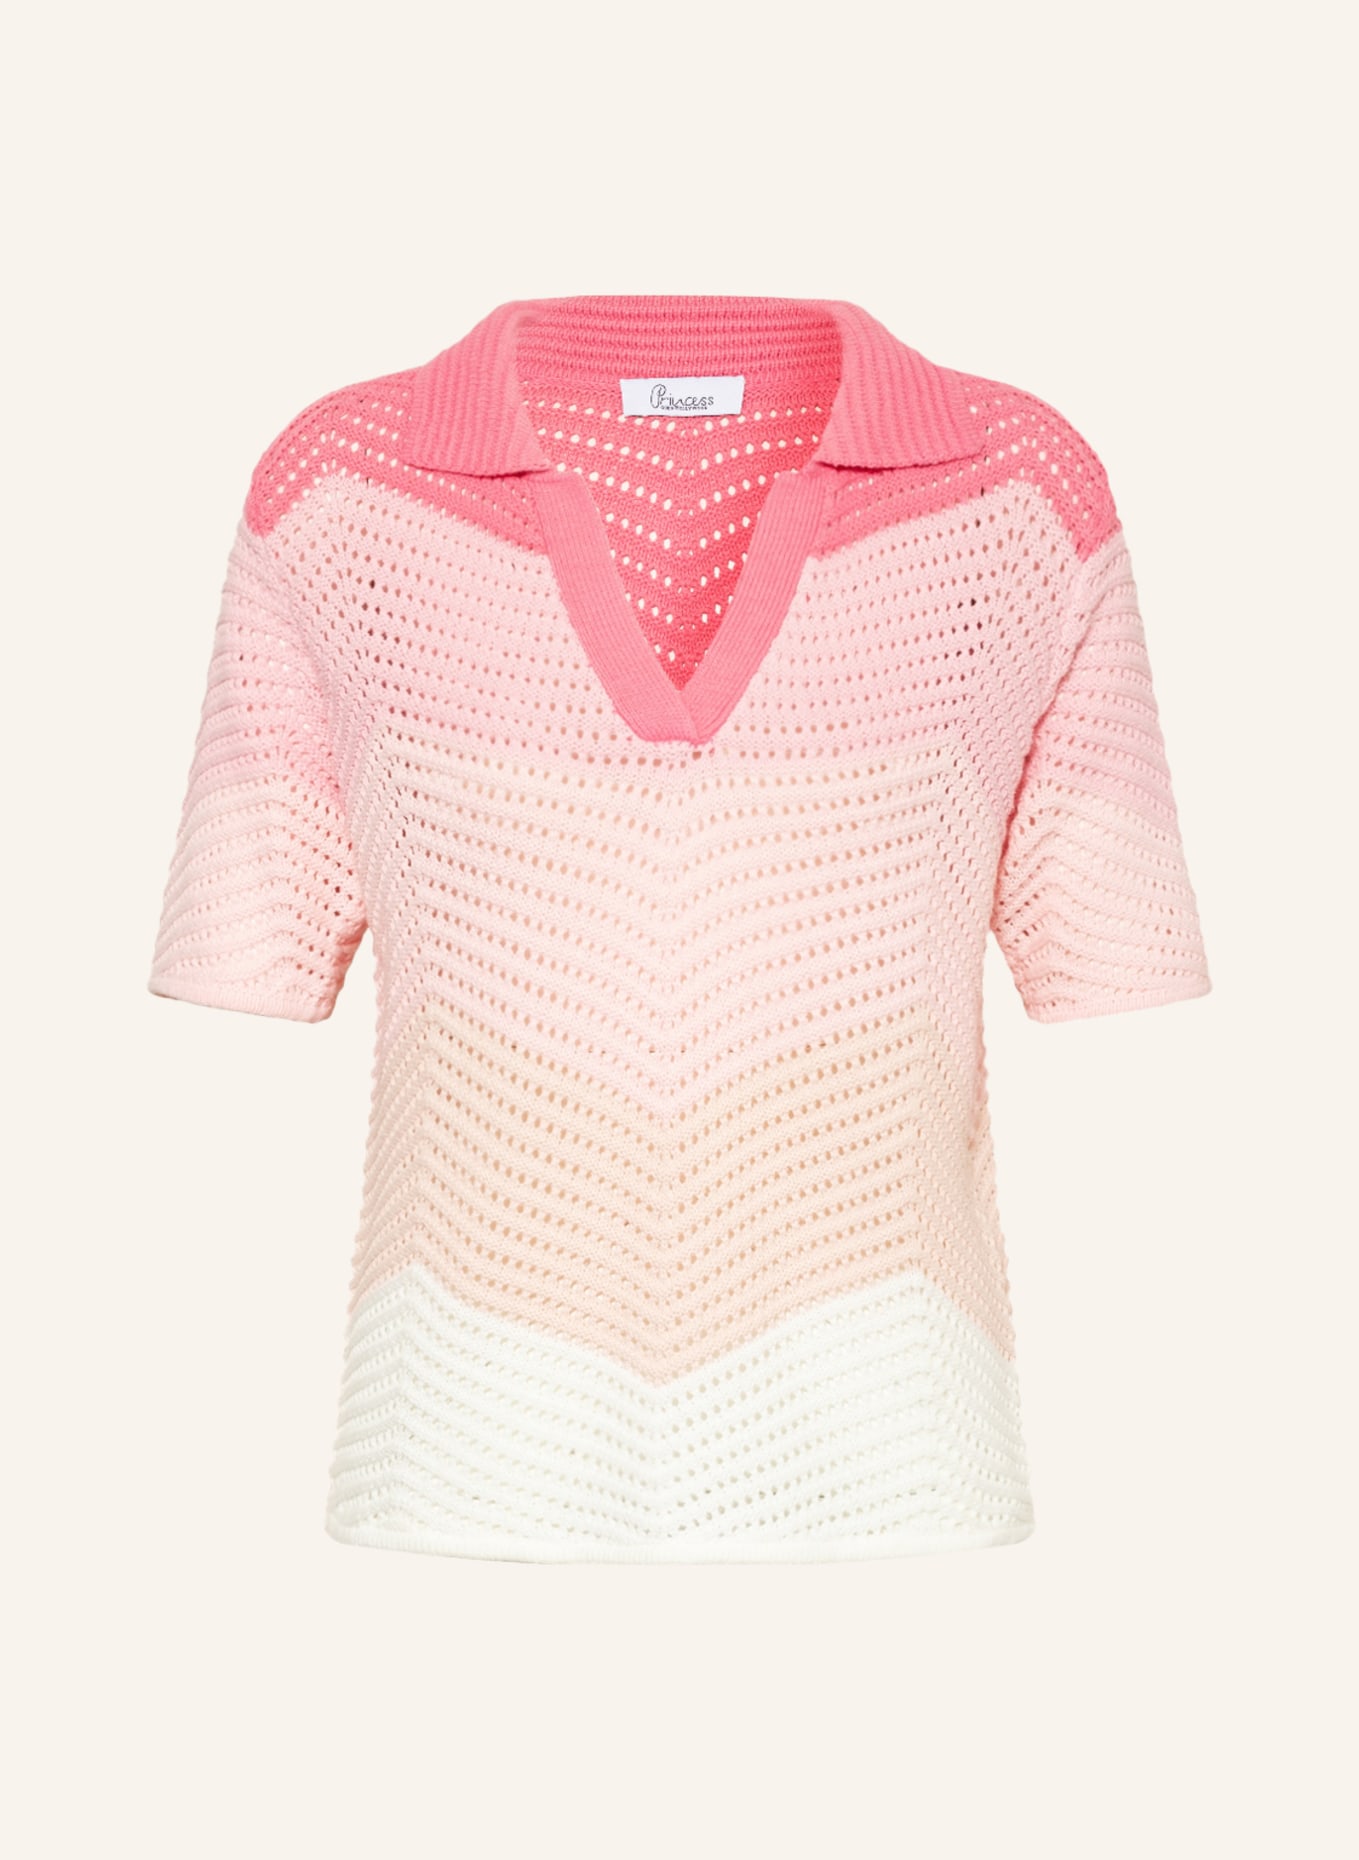 Princess GOES HOLLYWOOD Knitted polo shirt, Color: PINK/ LIGHT PINK/ ECRU (Image 1)